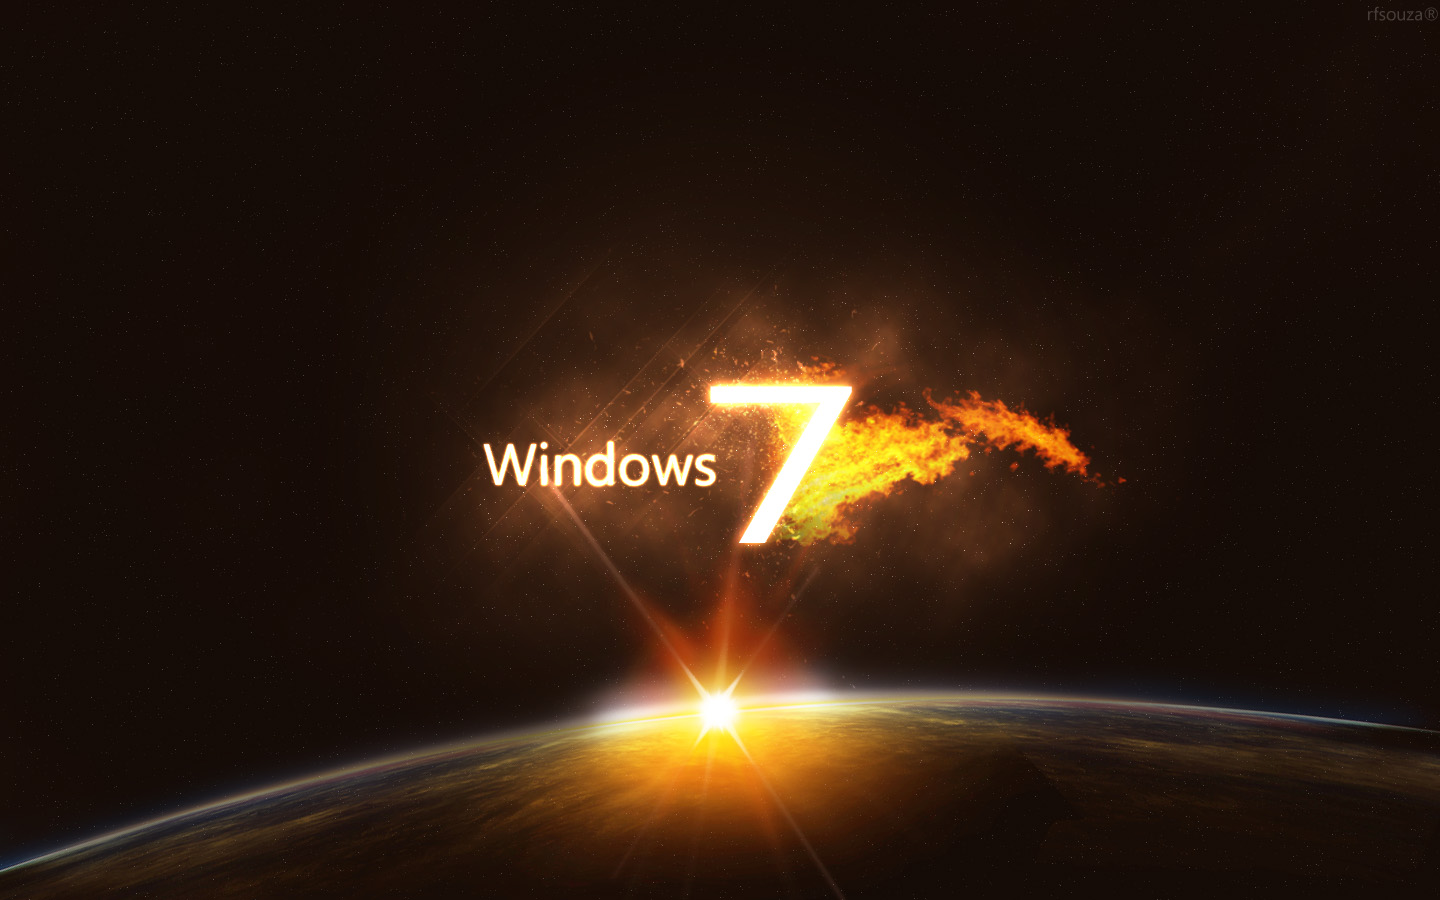 Windows Themes And Wallpaper March